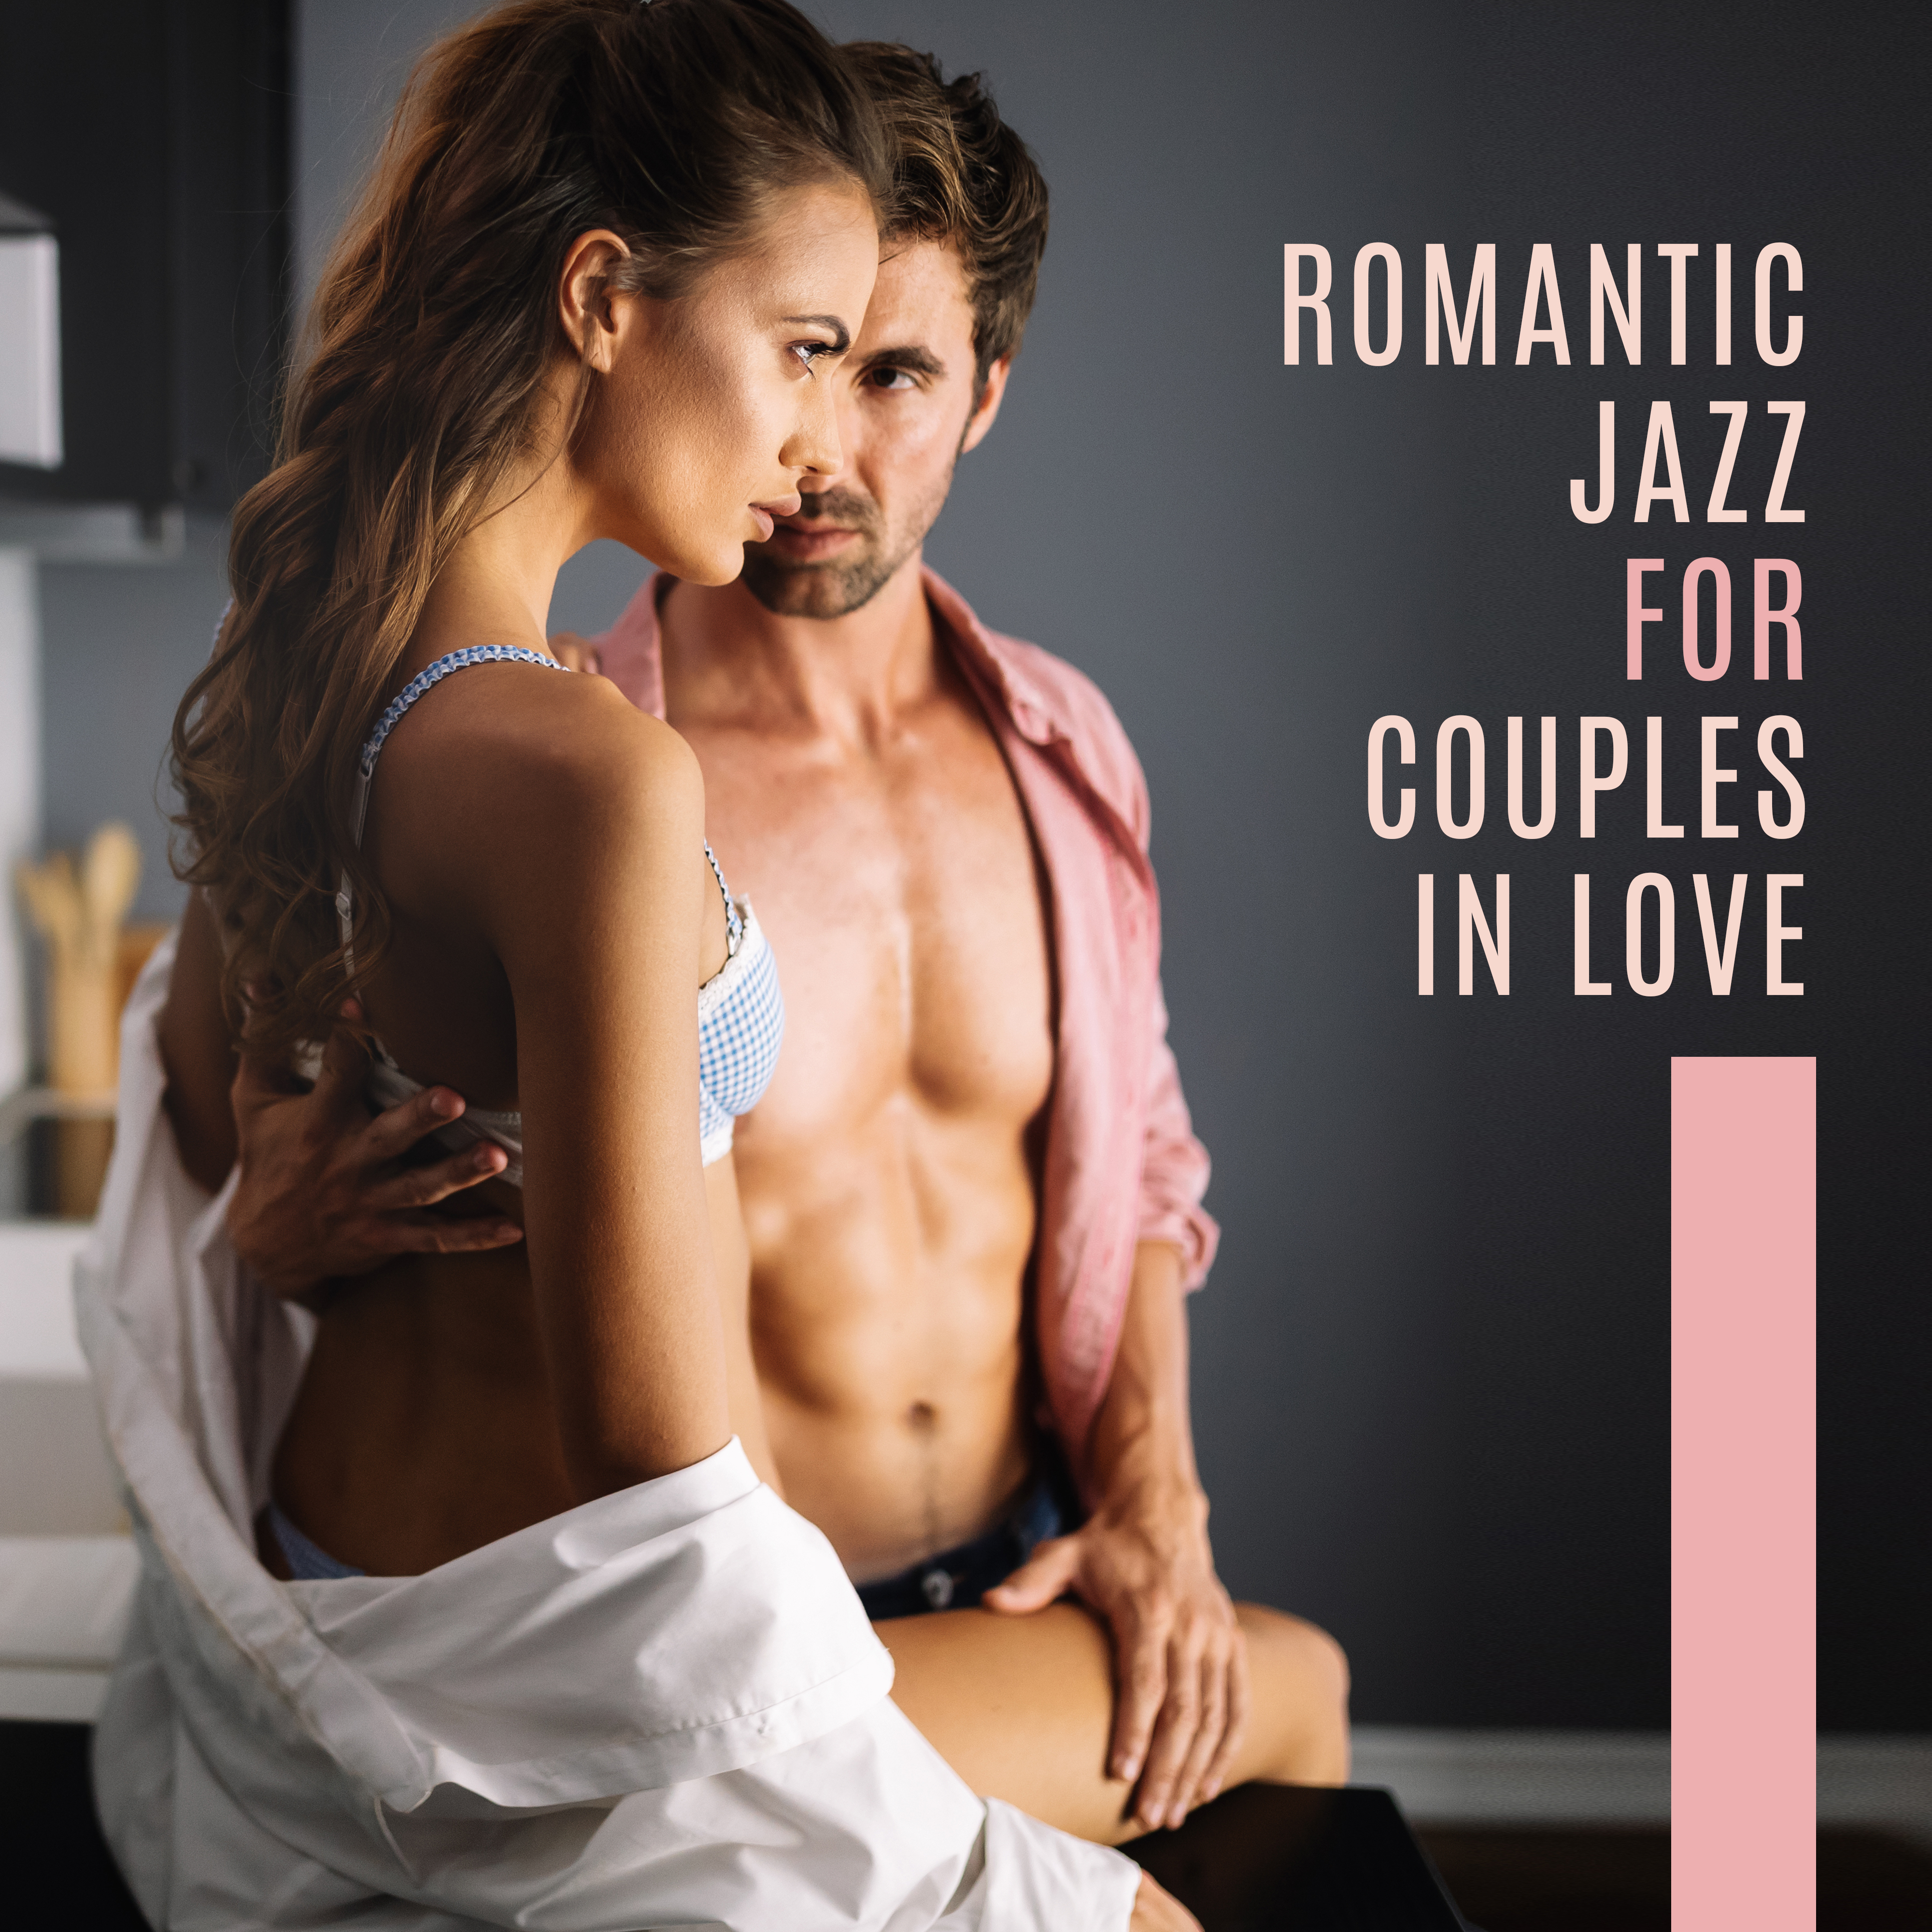 Romantic Jazz for Couples in Love